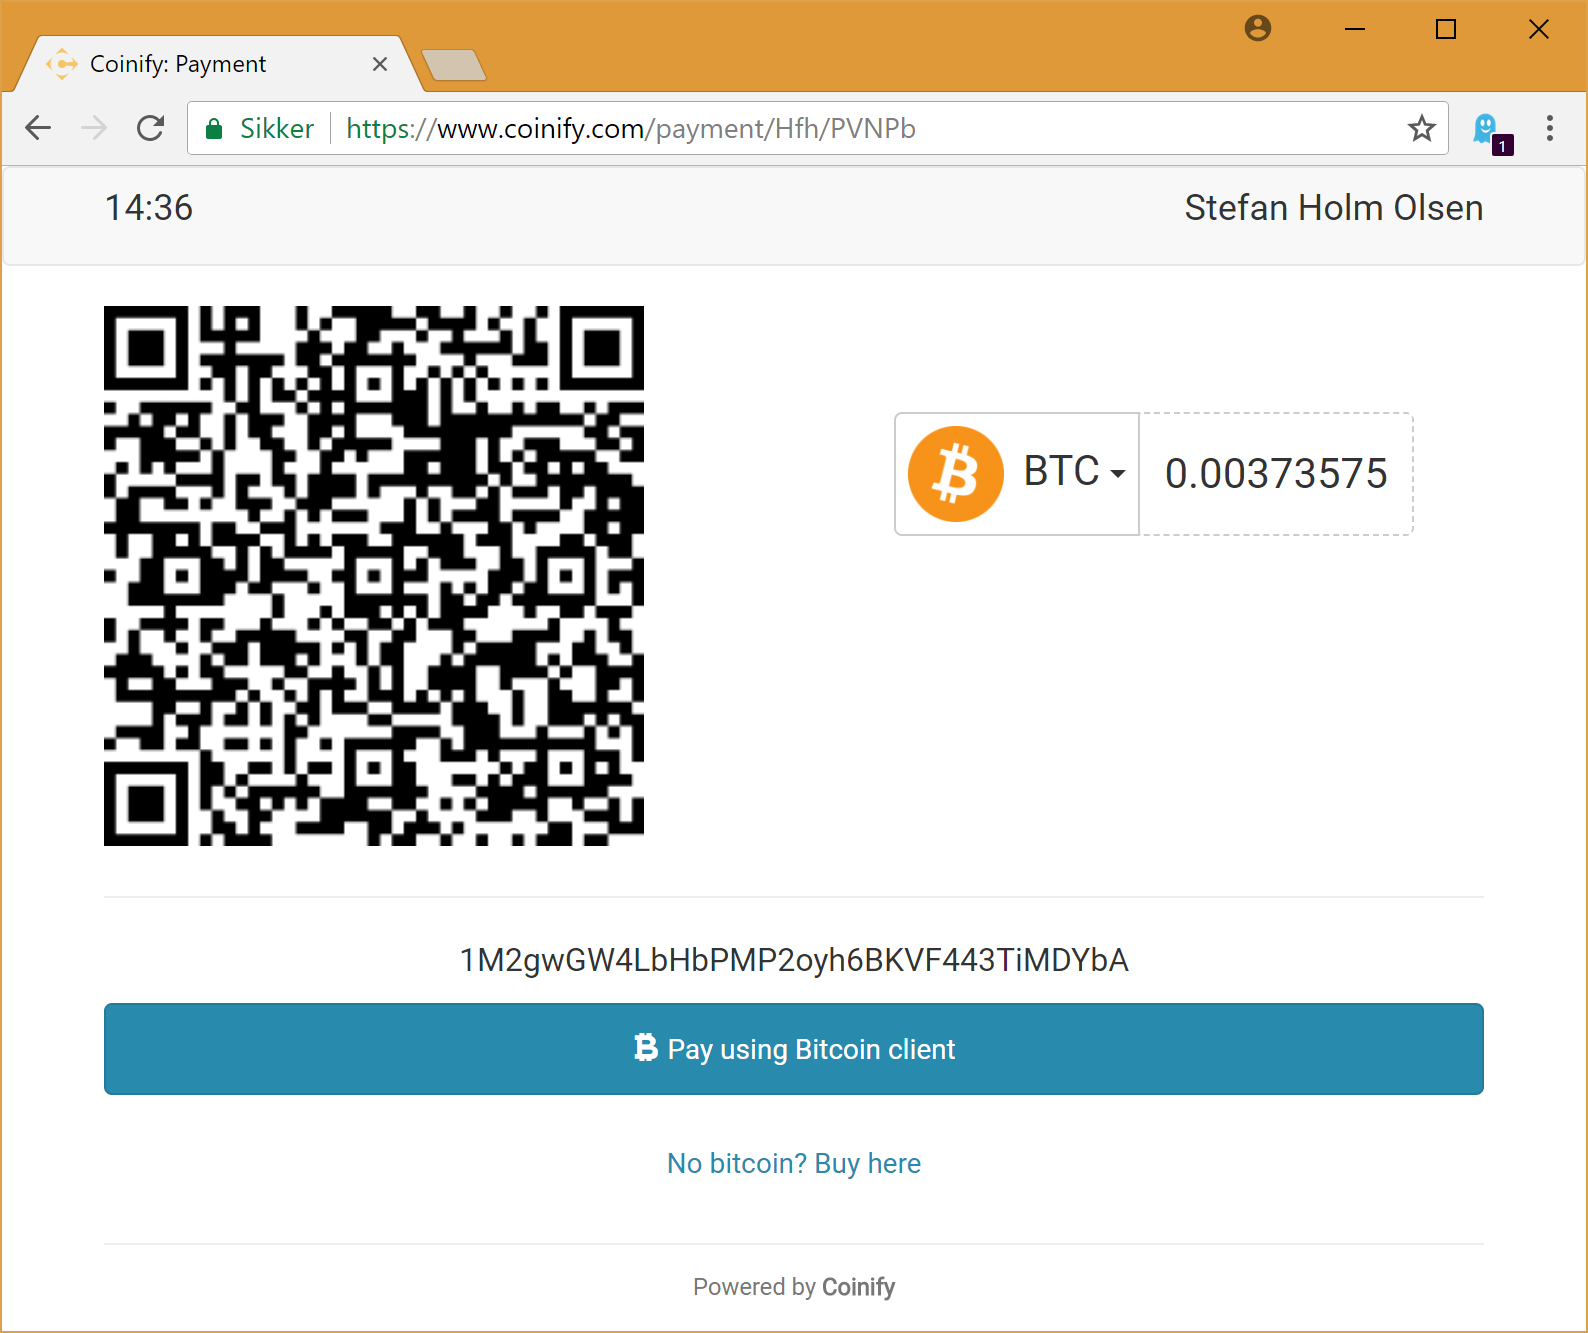 Screenshot of a Coinify payment window